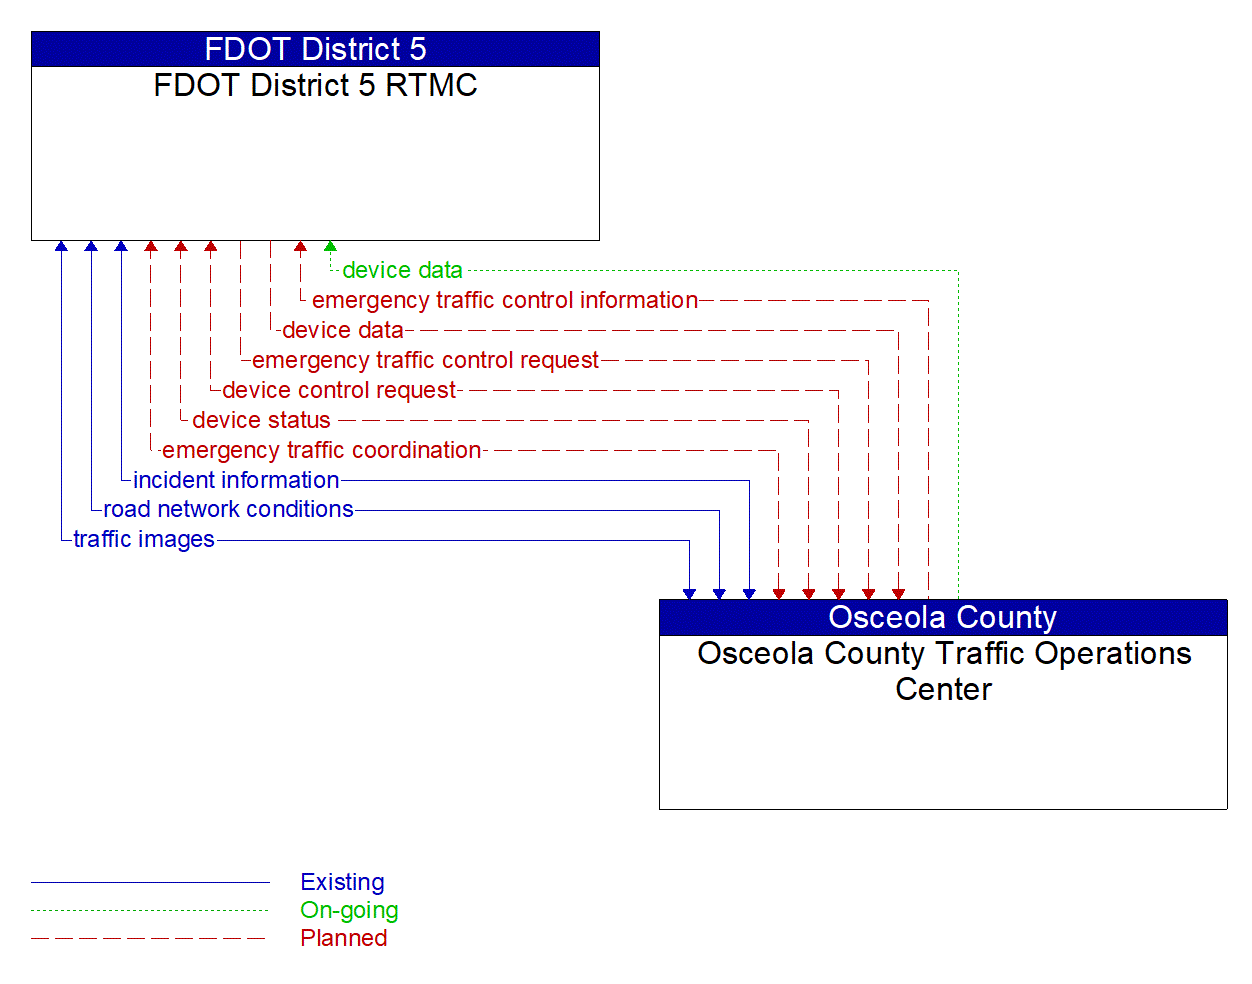 Architecture Flow Diagram: Osceola County Traffic Operations Center <--> FDOT District 5 RTMC